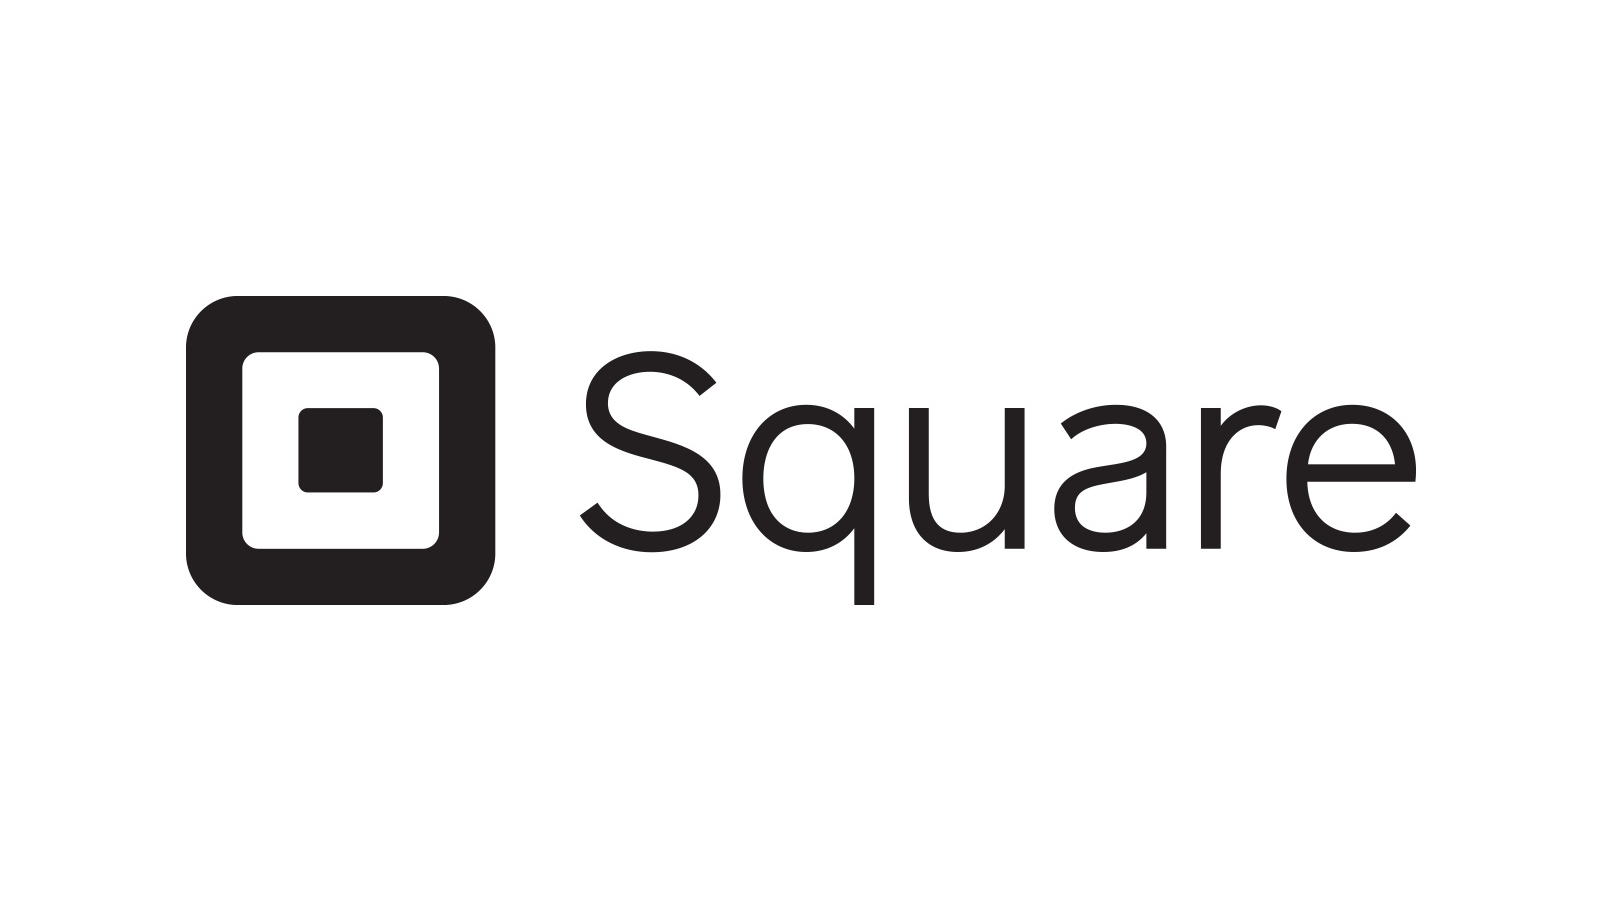 SQUARE: Square helps millions of sellers run their business-from secure credit card processing to point of sale solutions. Get paid faster with Square. Sign up today!